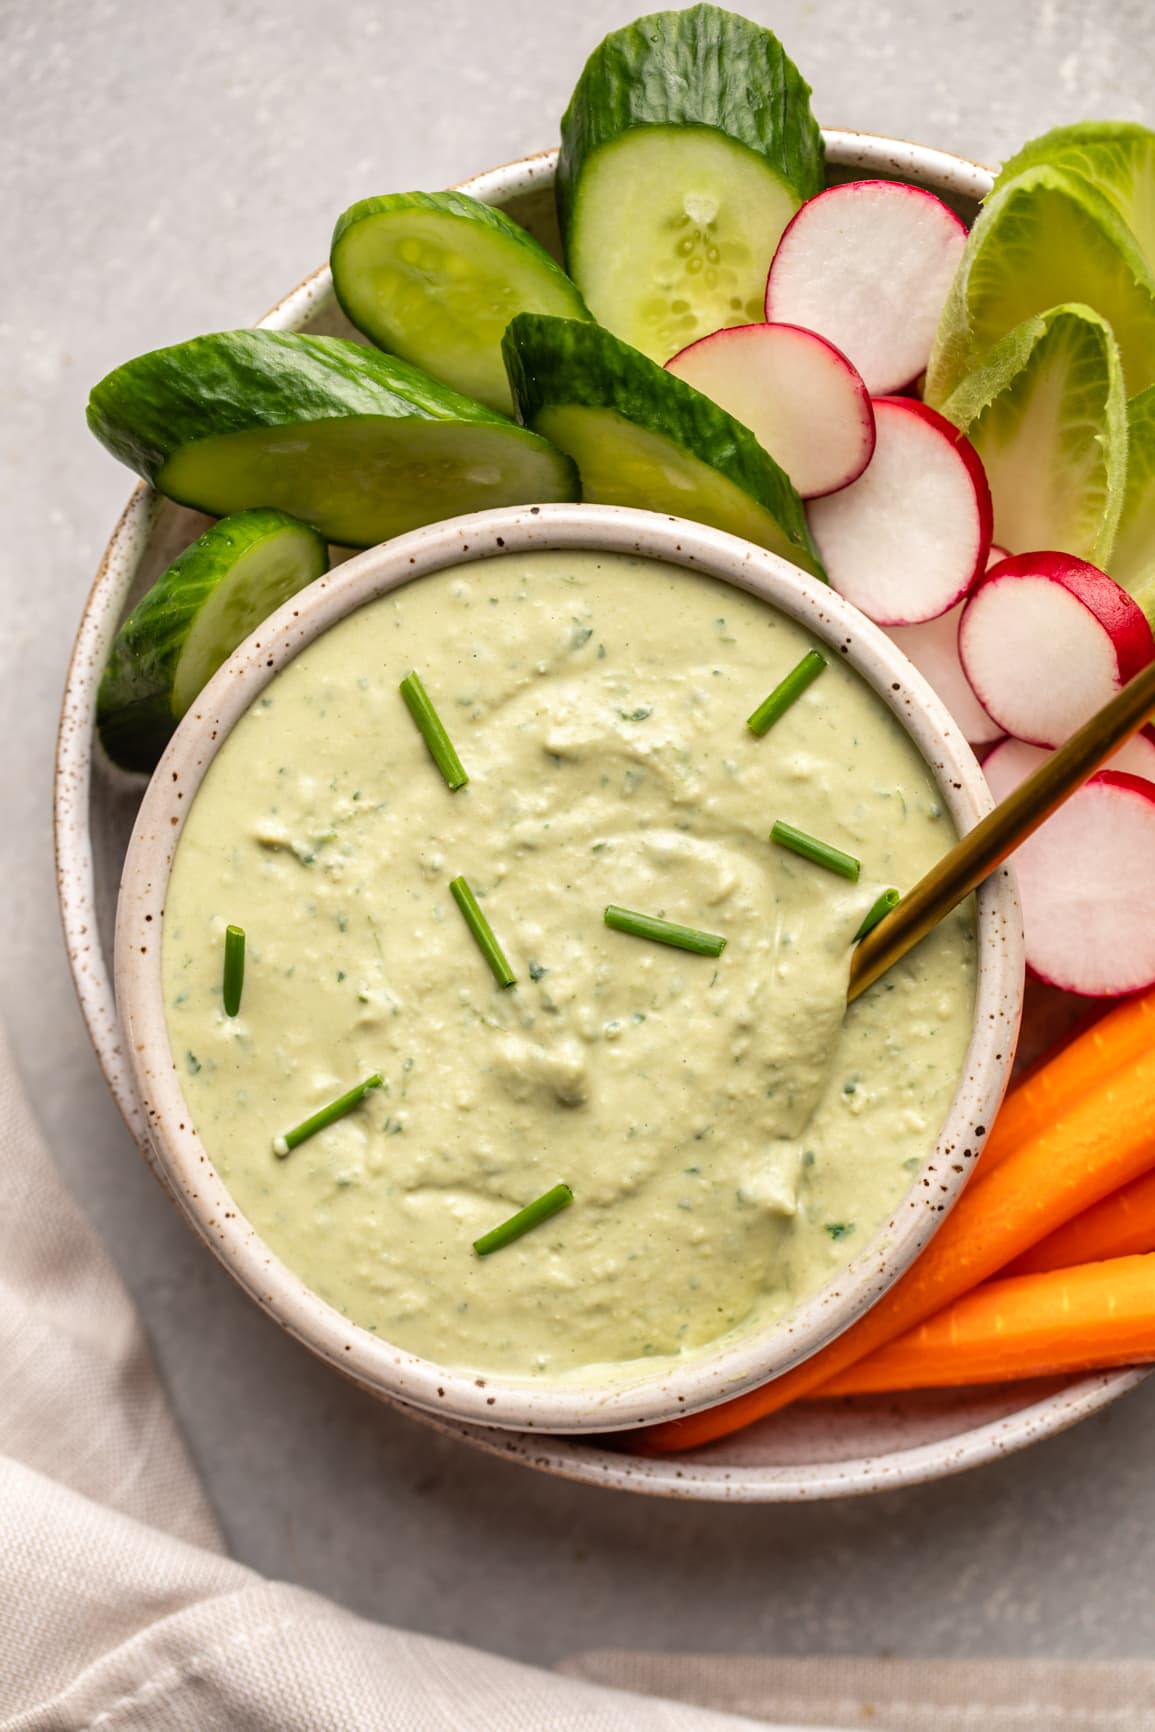 creamy white bean dip with herbs in grey bowl with cucumbers, radishes, and carrots